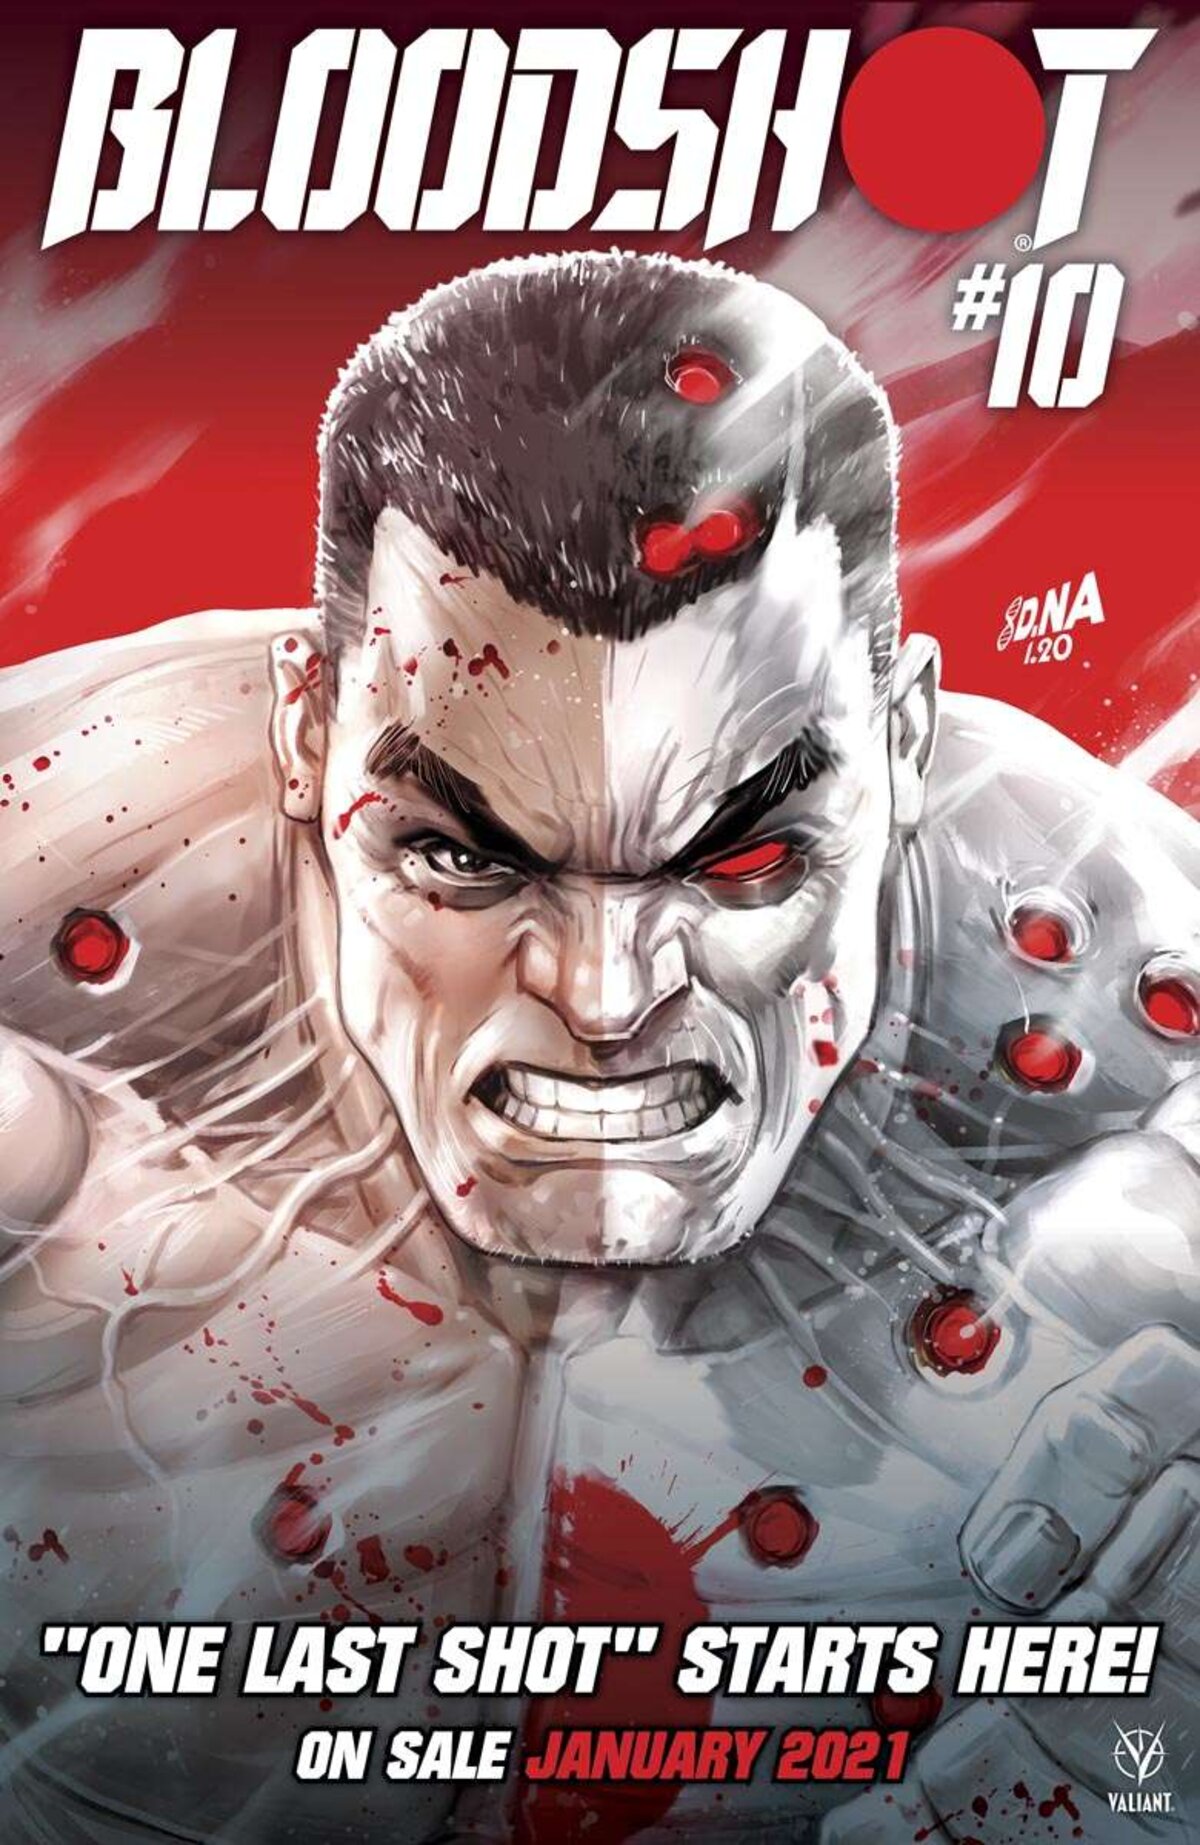 Tim seeley on his final bloodshot arc as they bring film world to ic canon wire